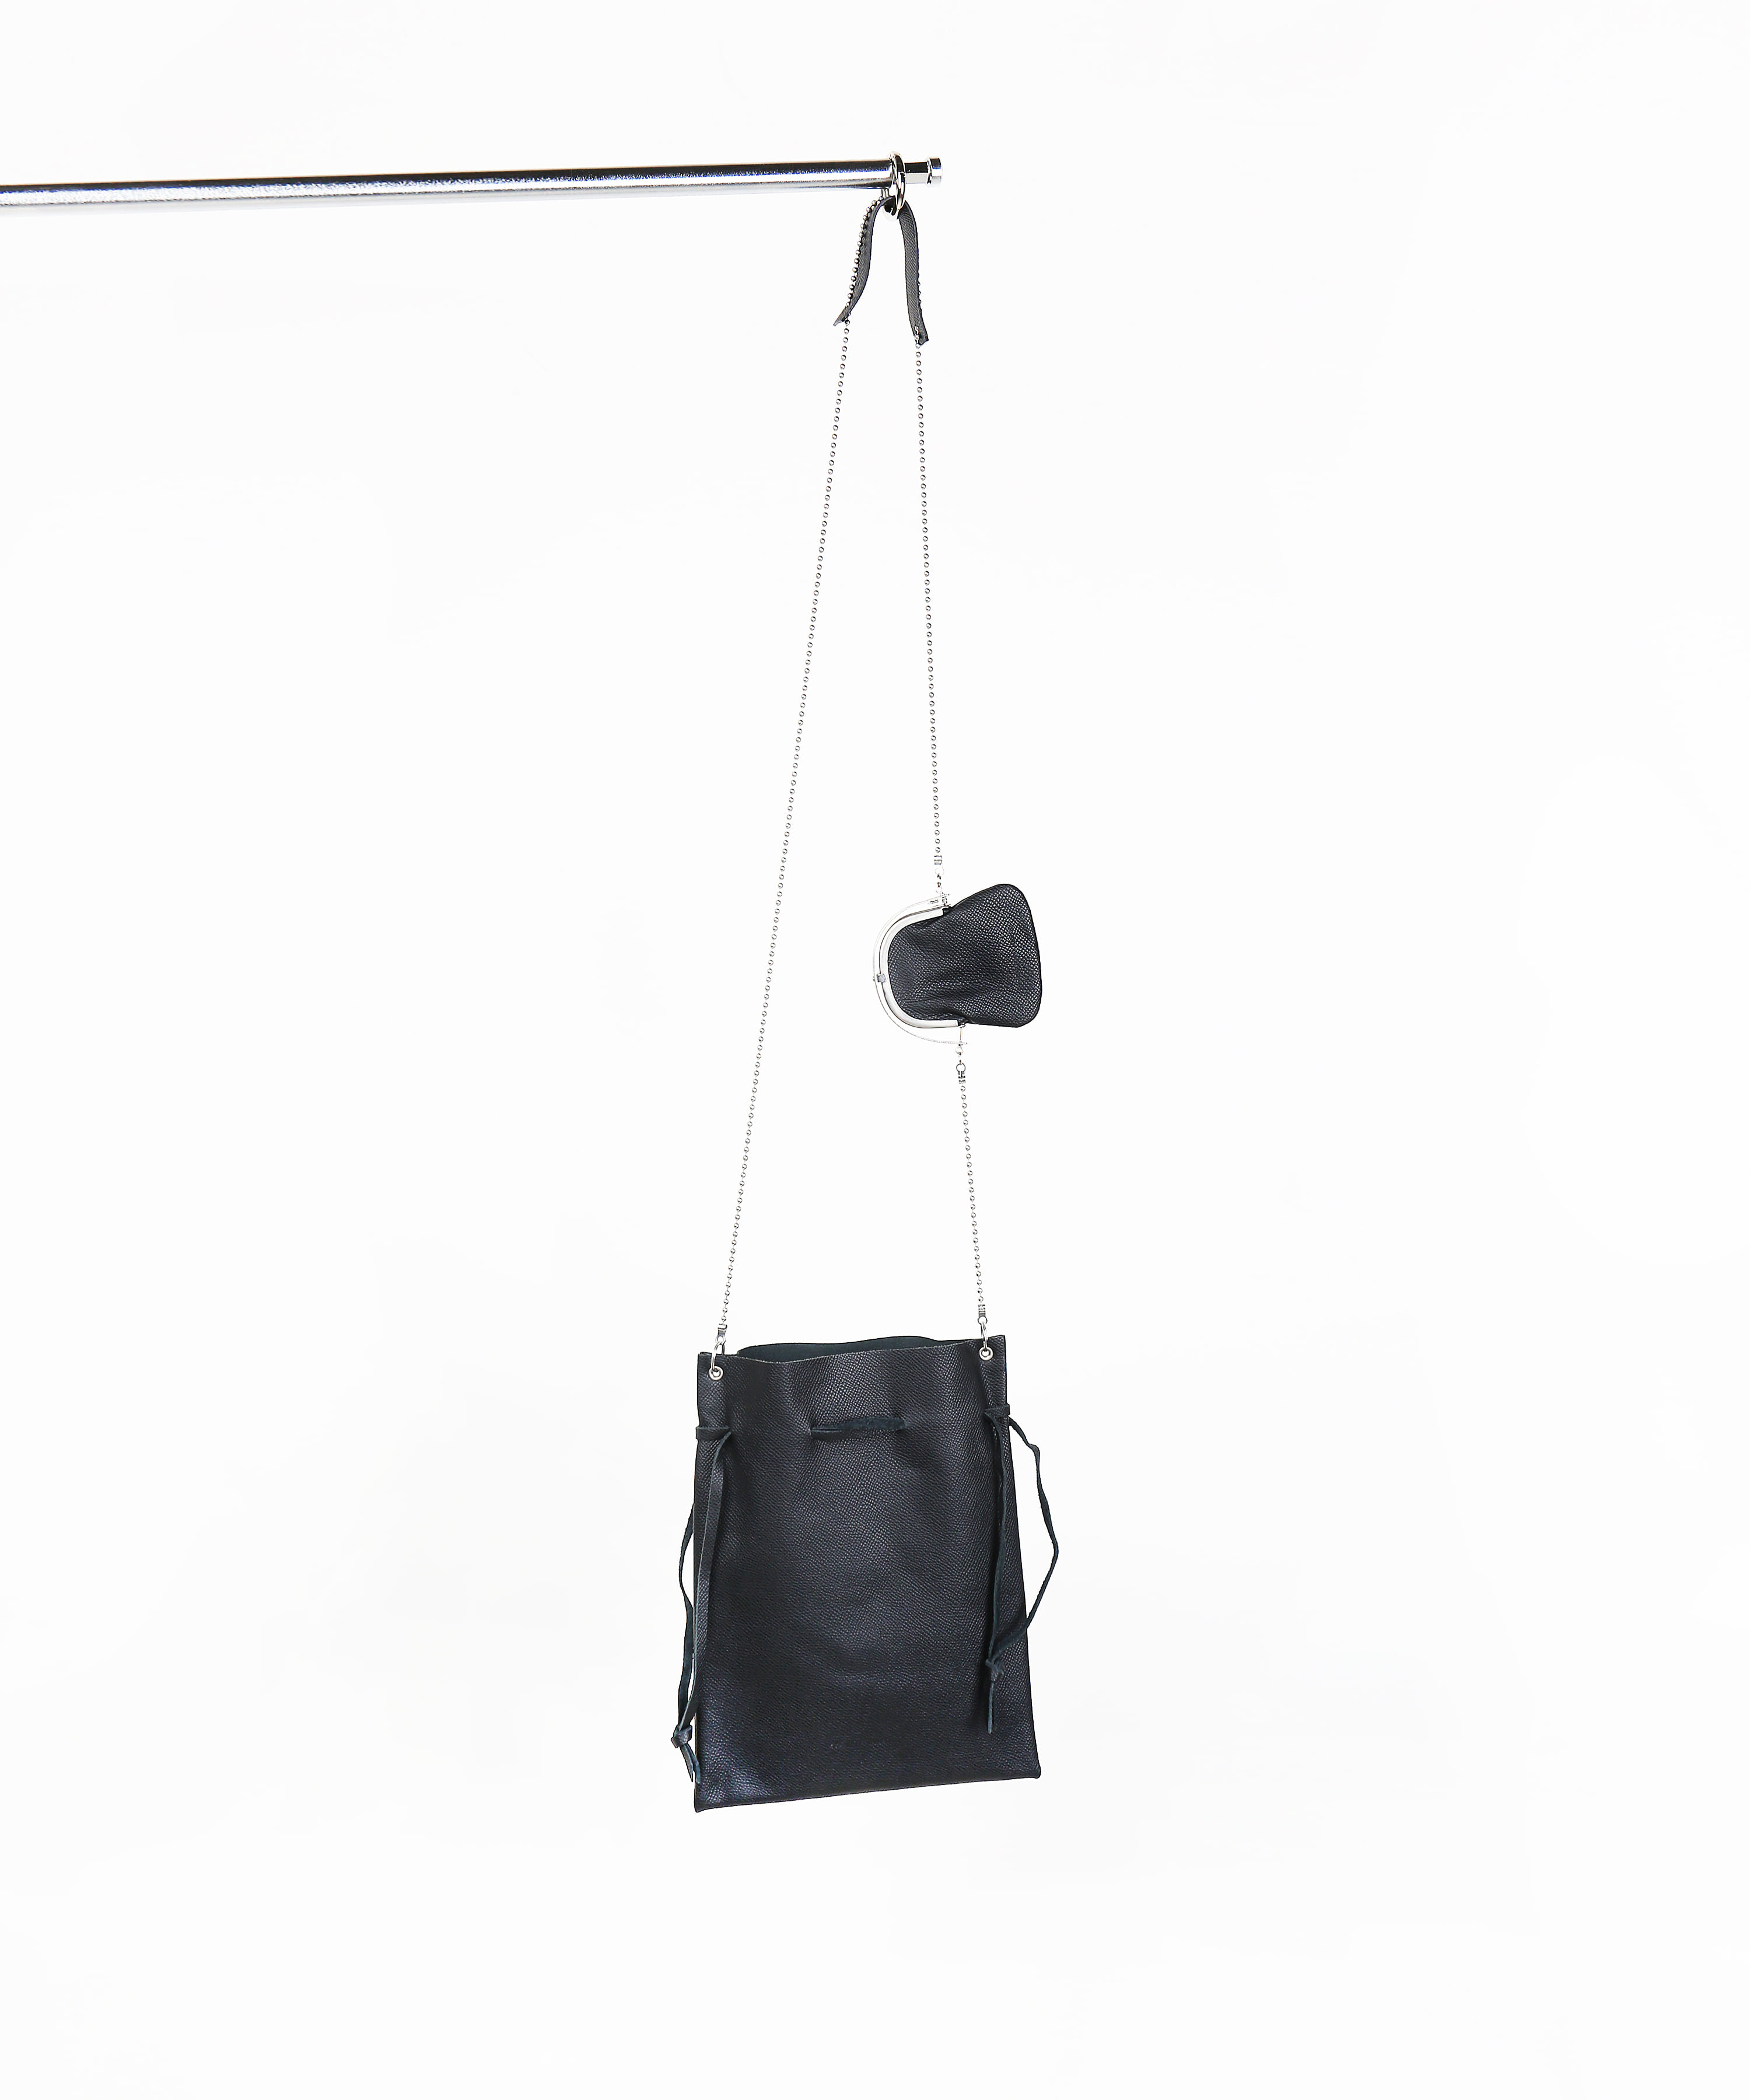 ODD - FRAME PURSE WITH POUCH BLACK